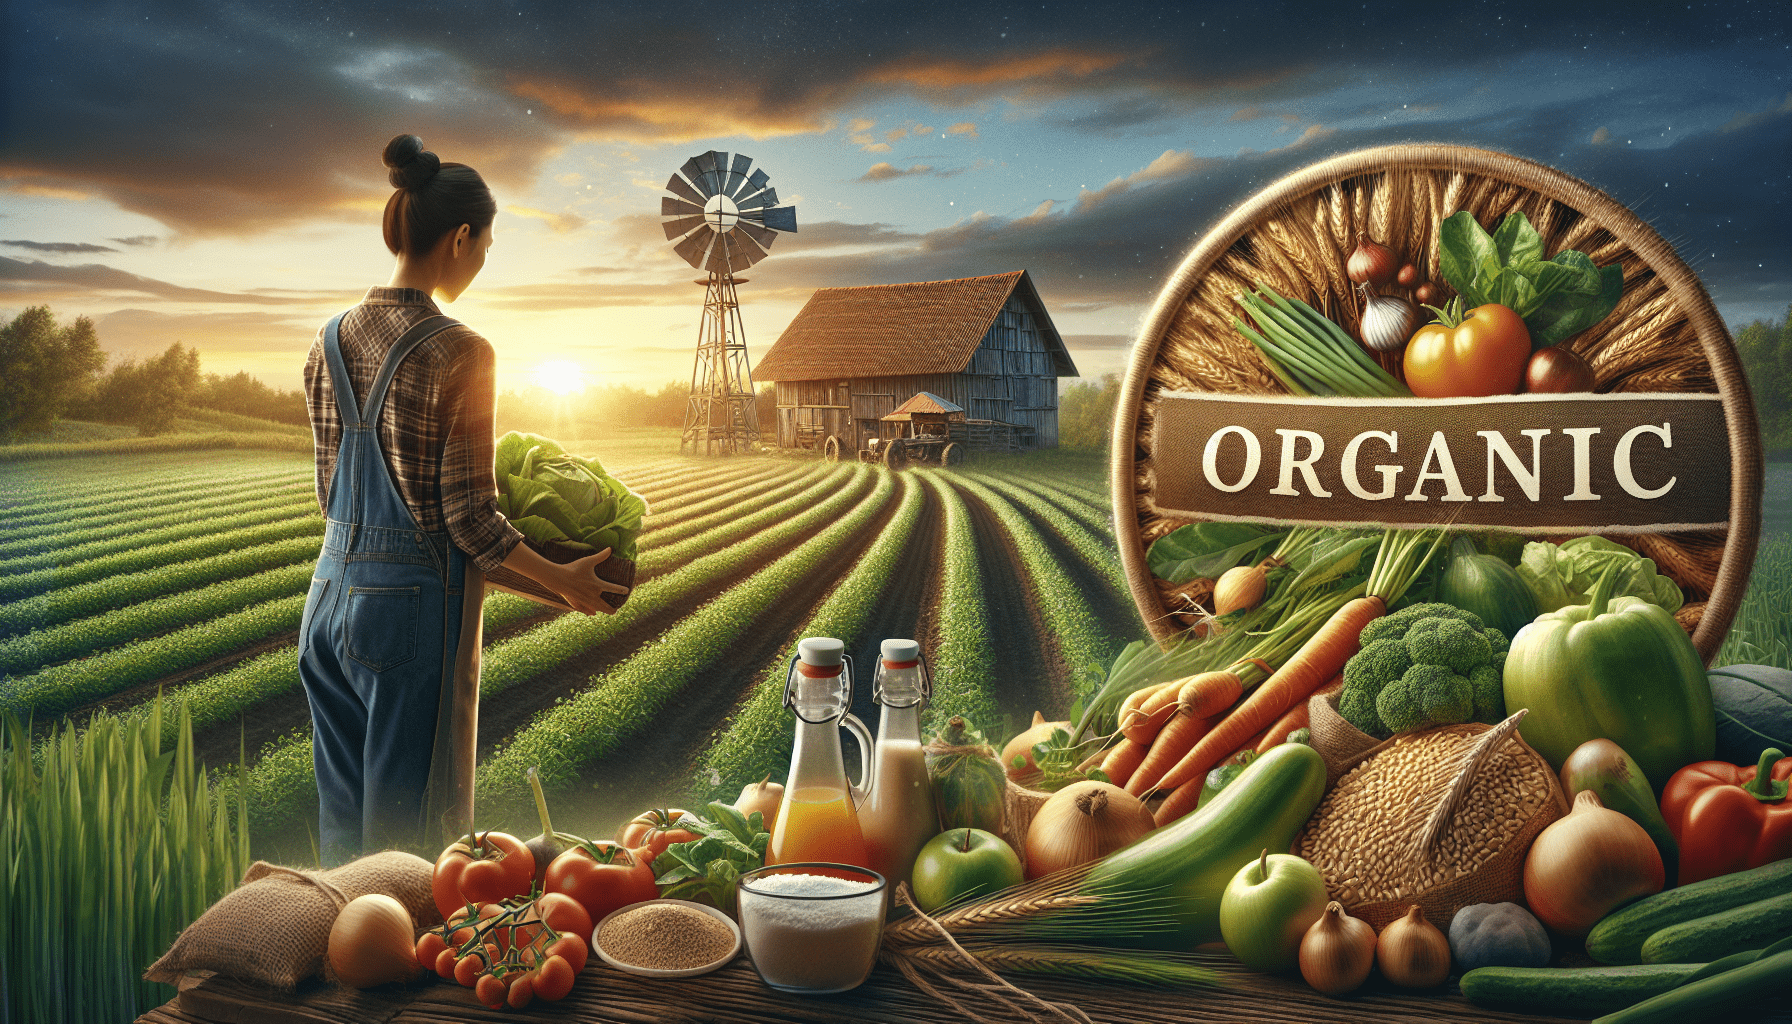 What Does “organic” Mean In Terms Of Food And Products?